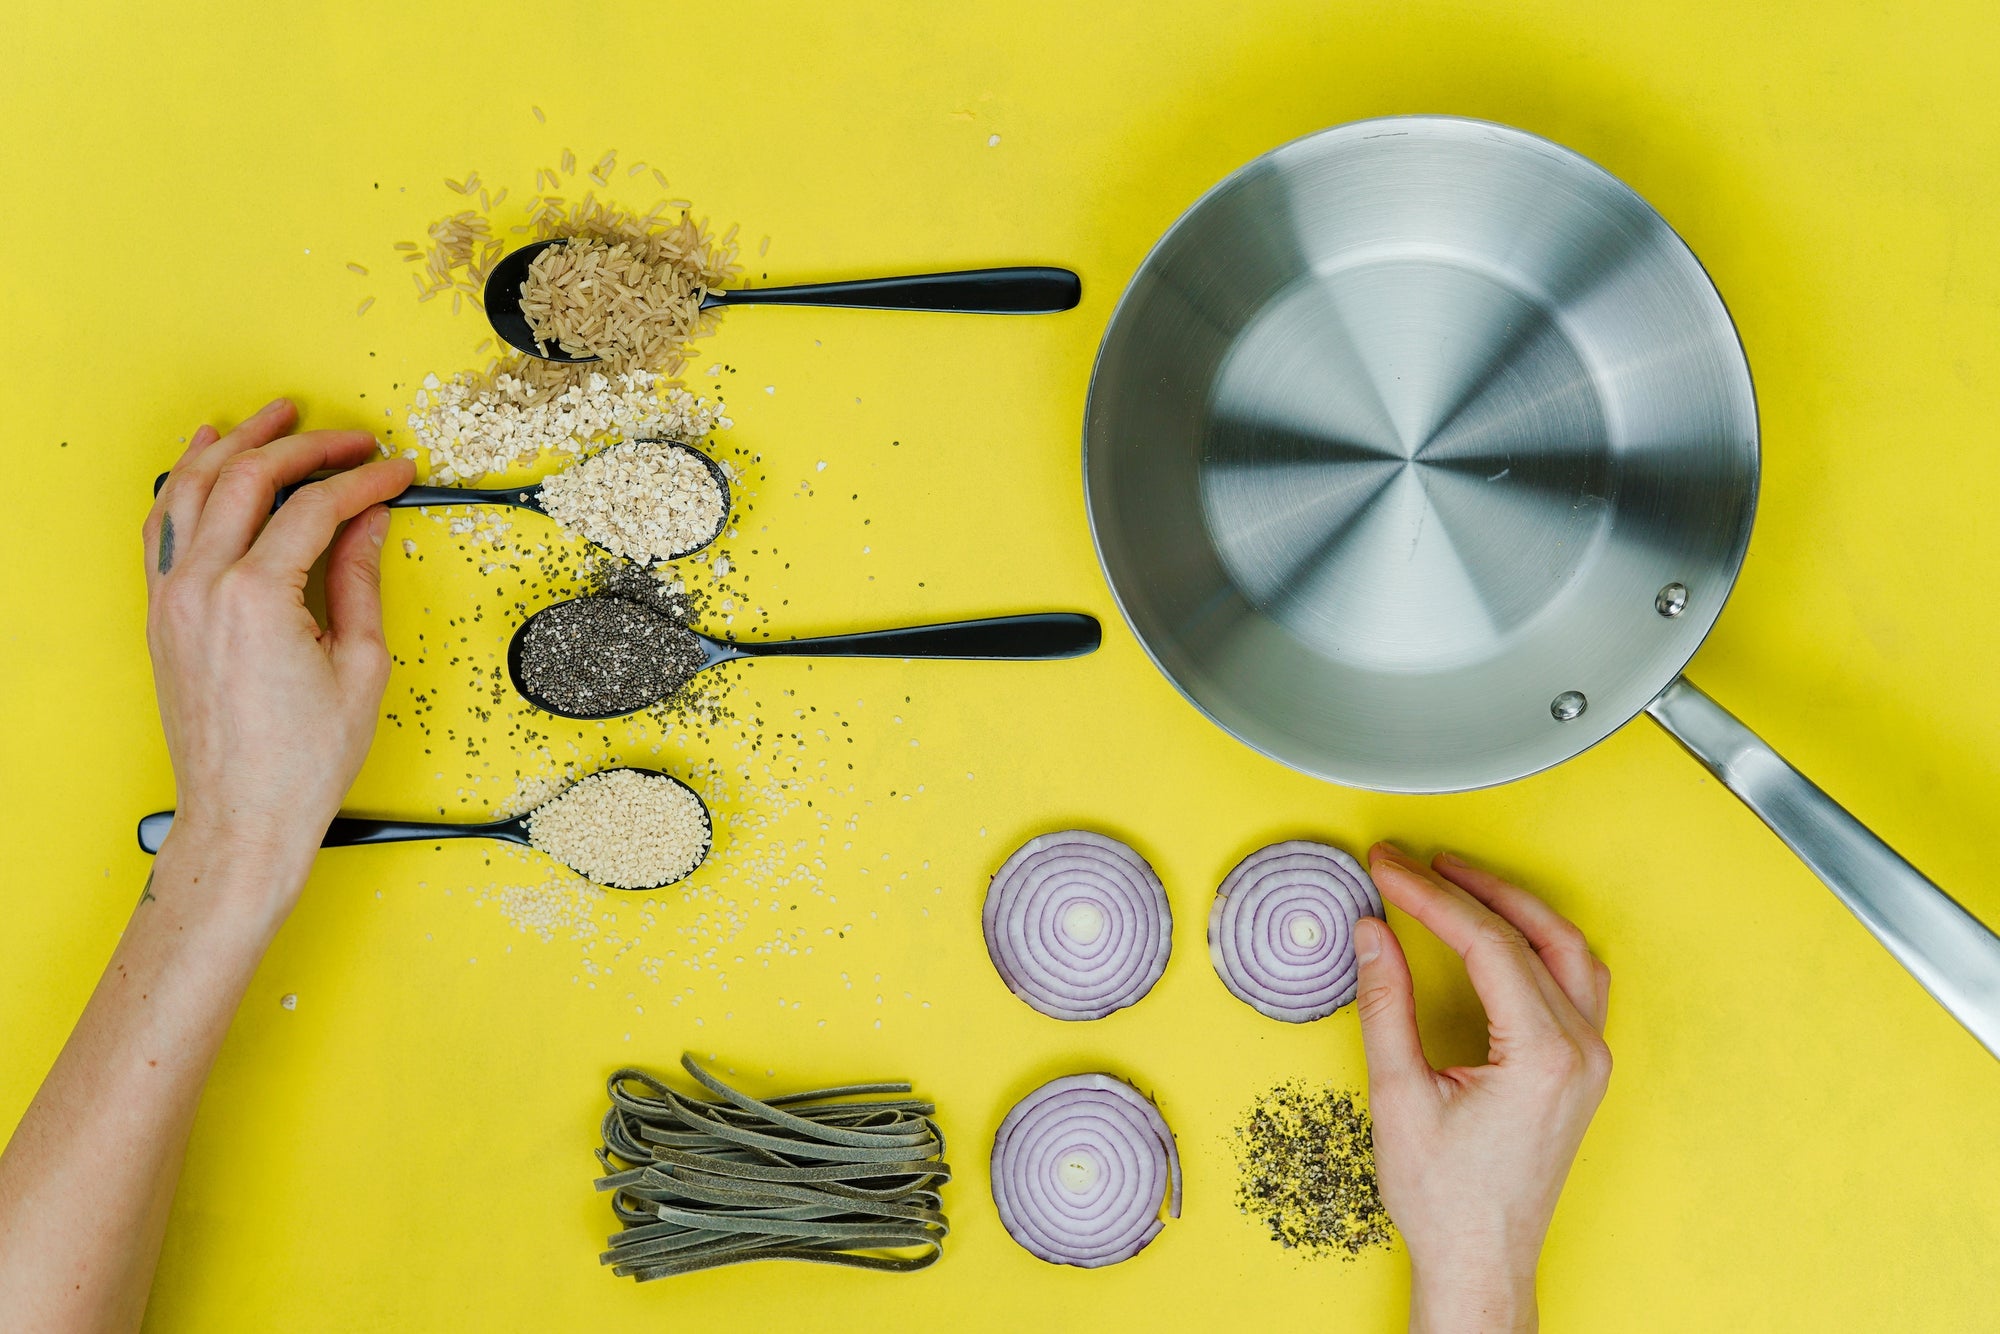 Cooking with stainless steel: artfully displayed ingredients around a stainless steel pan